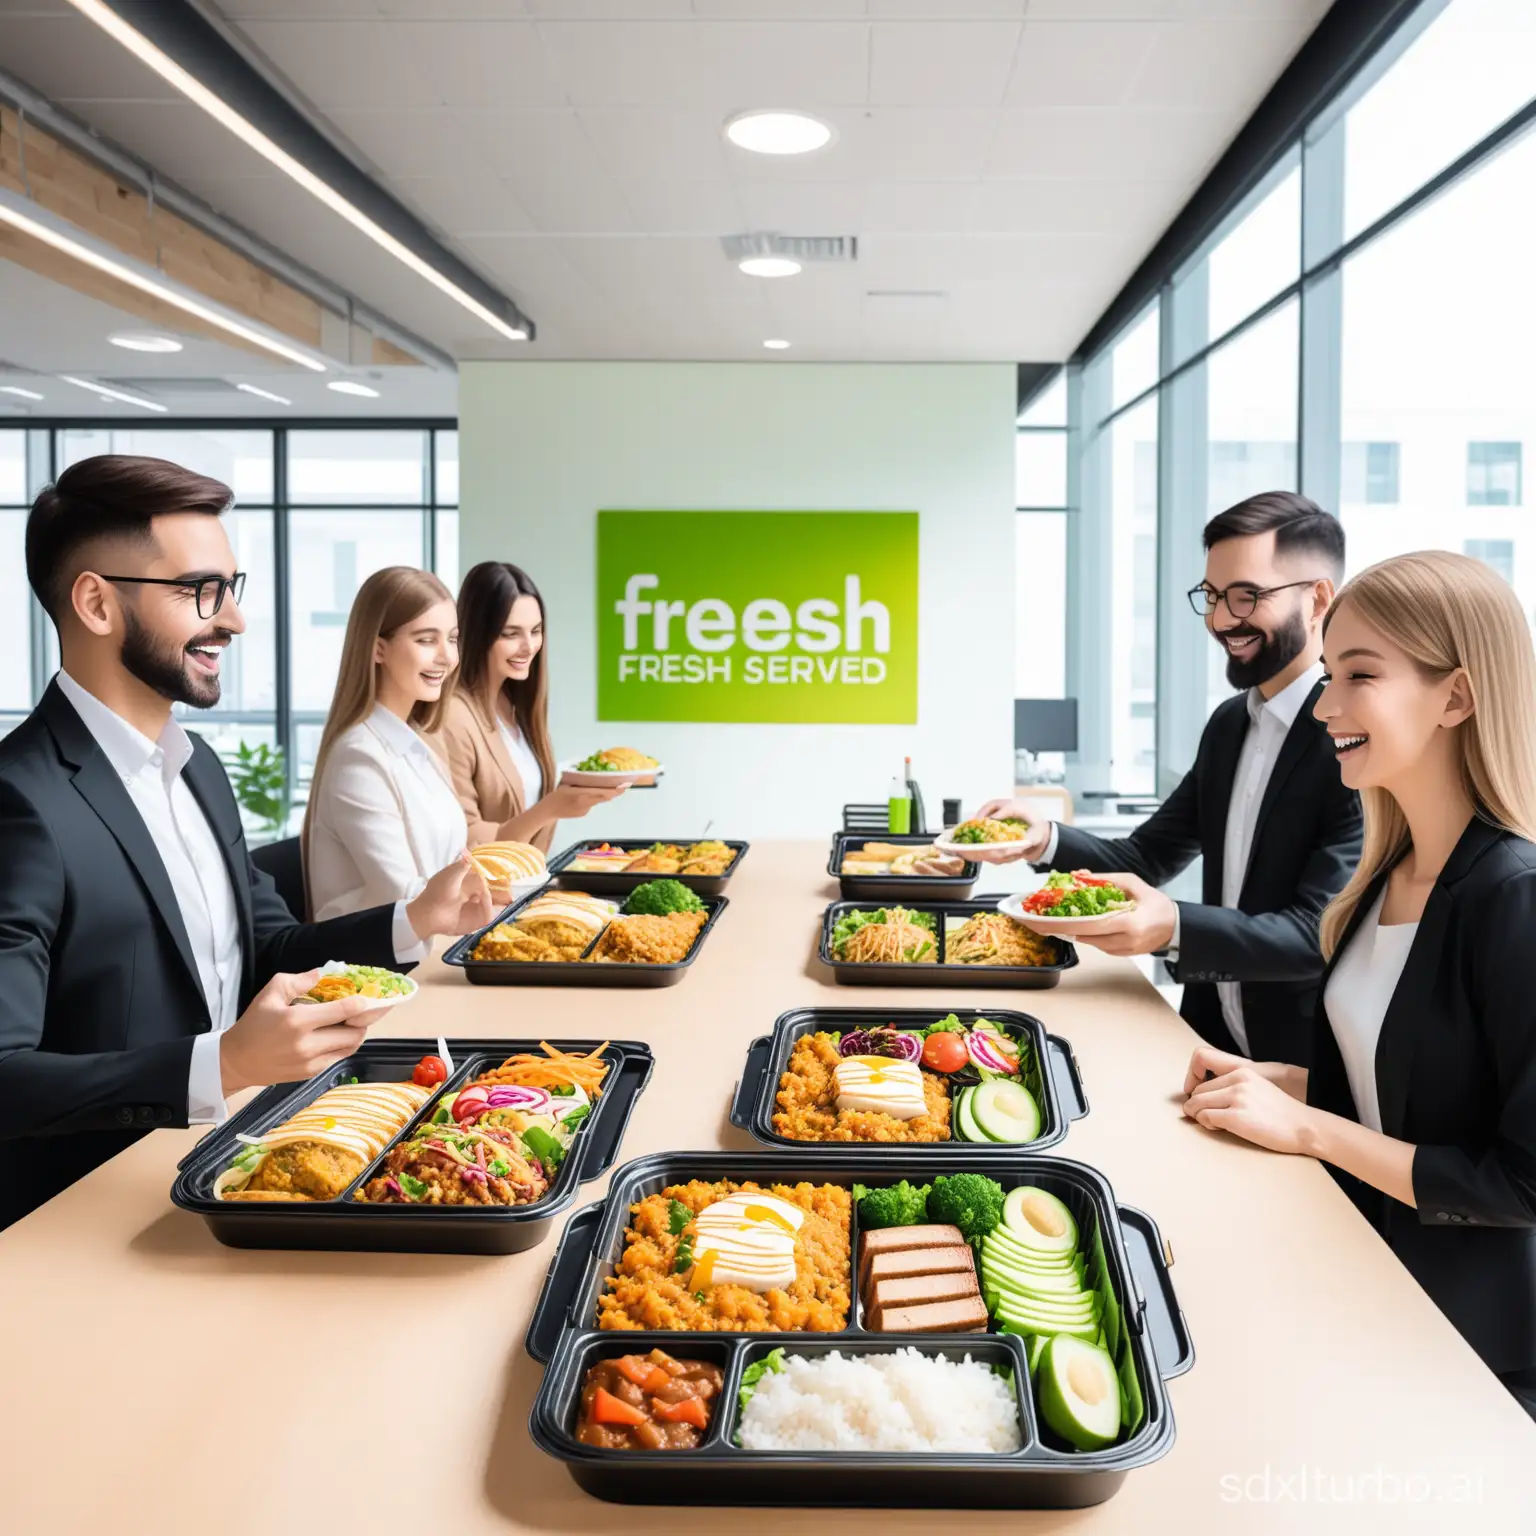 a group of colleagues, having office lunch in a friendly environment meal trays, and the branding of "Fresh Served" on it make all the text in english language